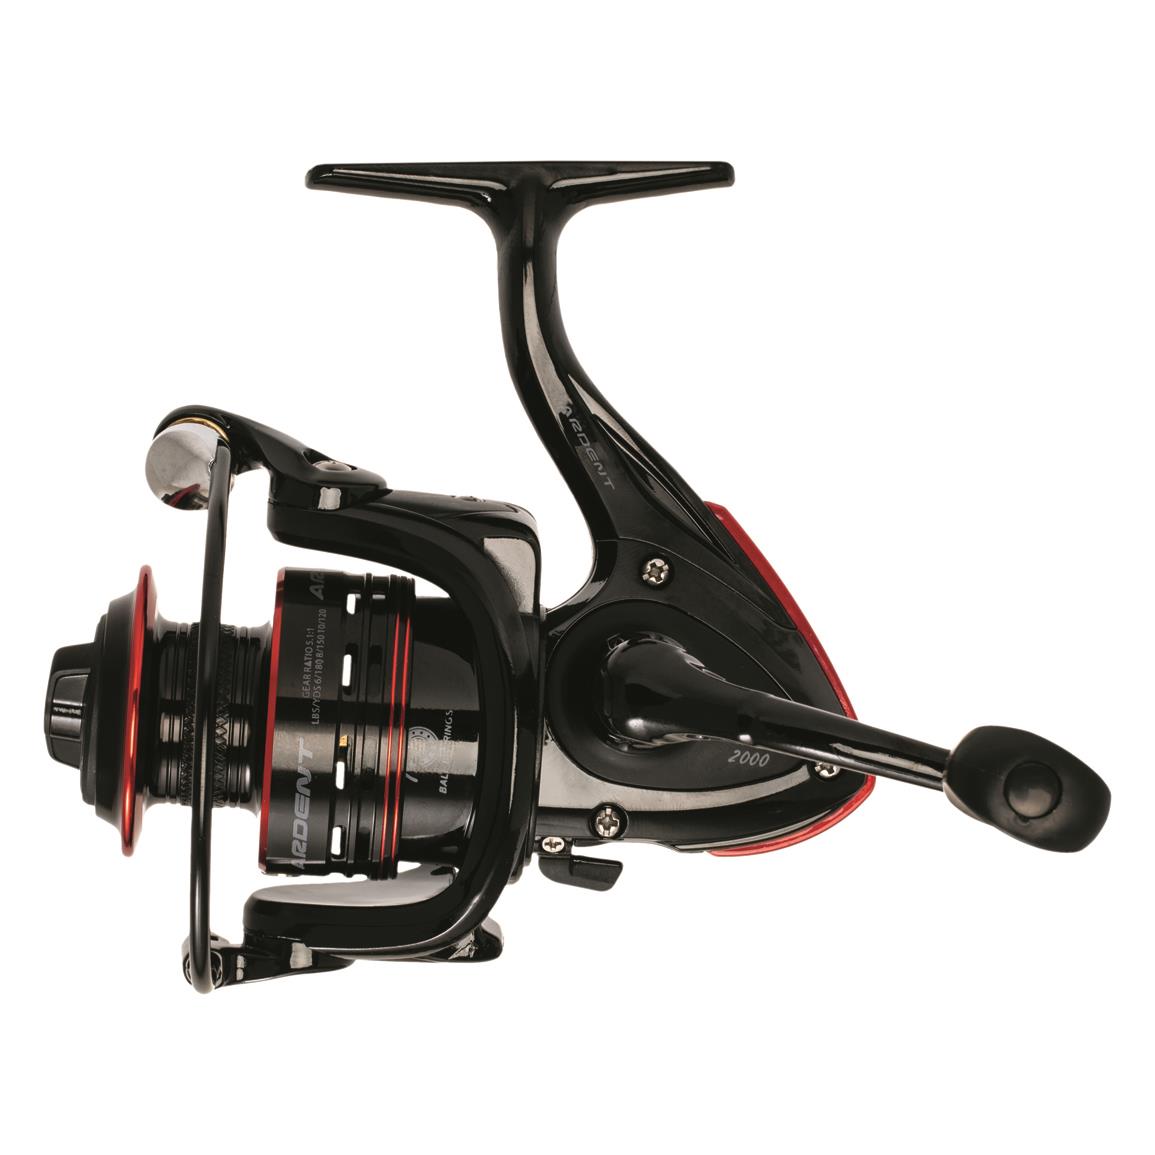 Ardent Finesse Spinning Reel, Size 2000, 6.0:1 Gear Ratio